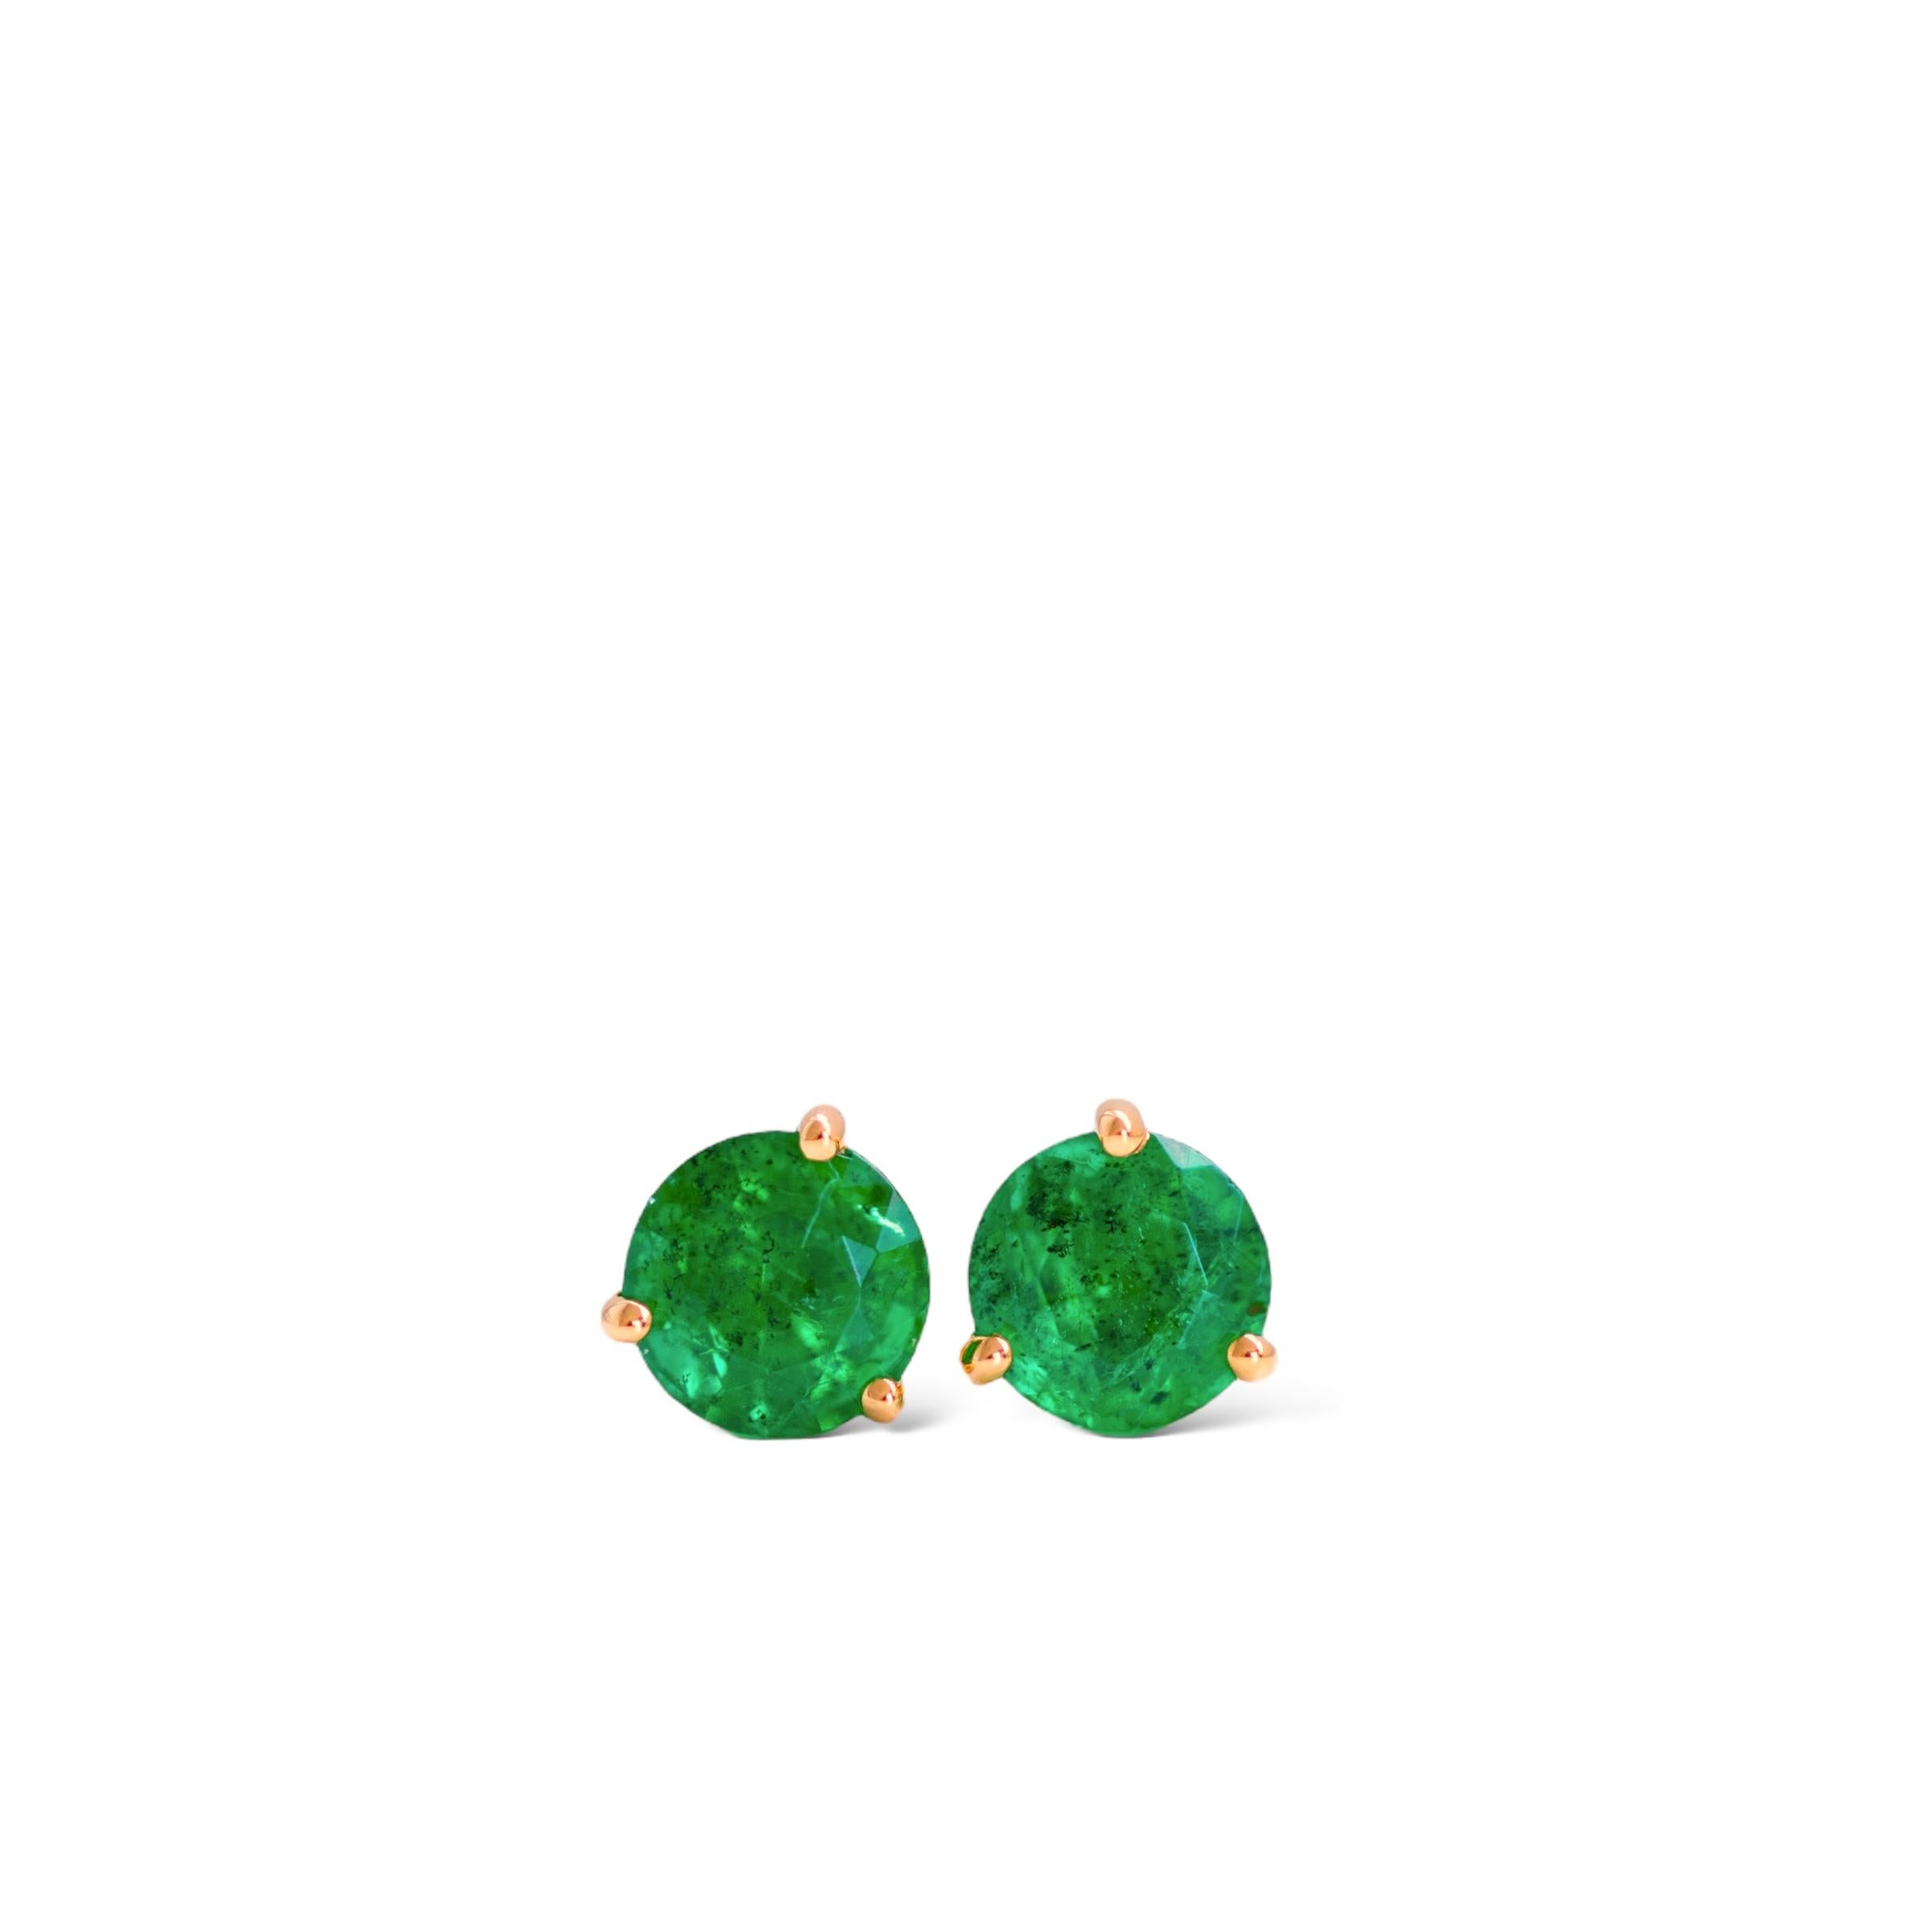 Stunning 0.74ct natural round green emerald studs set in luxurious 18k yellow gold.

These beautiful perfectly matched emeralds are from Zambia and measure 4.5mm each. The emerald colour is a medium-dark vivid green. The studs are set in a